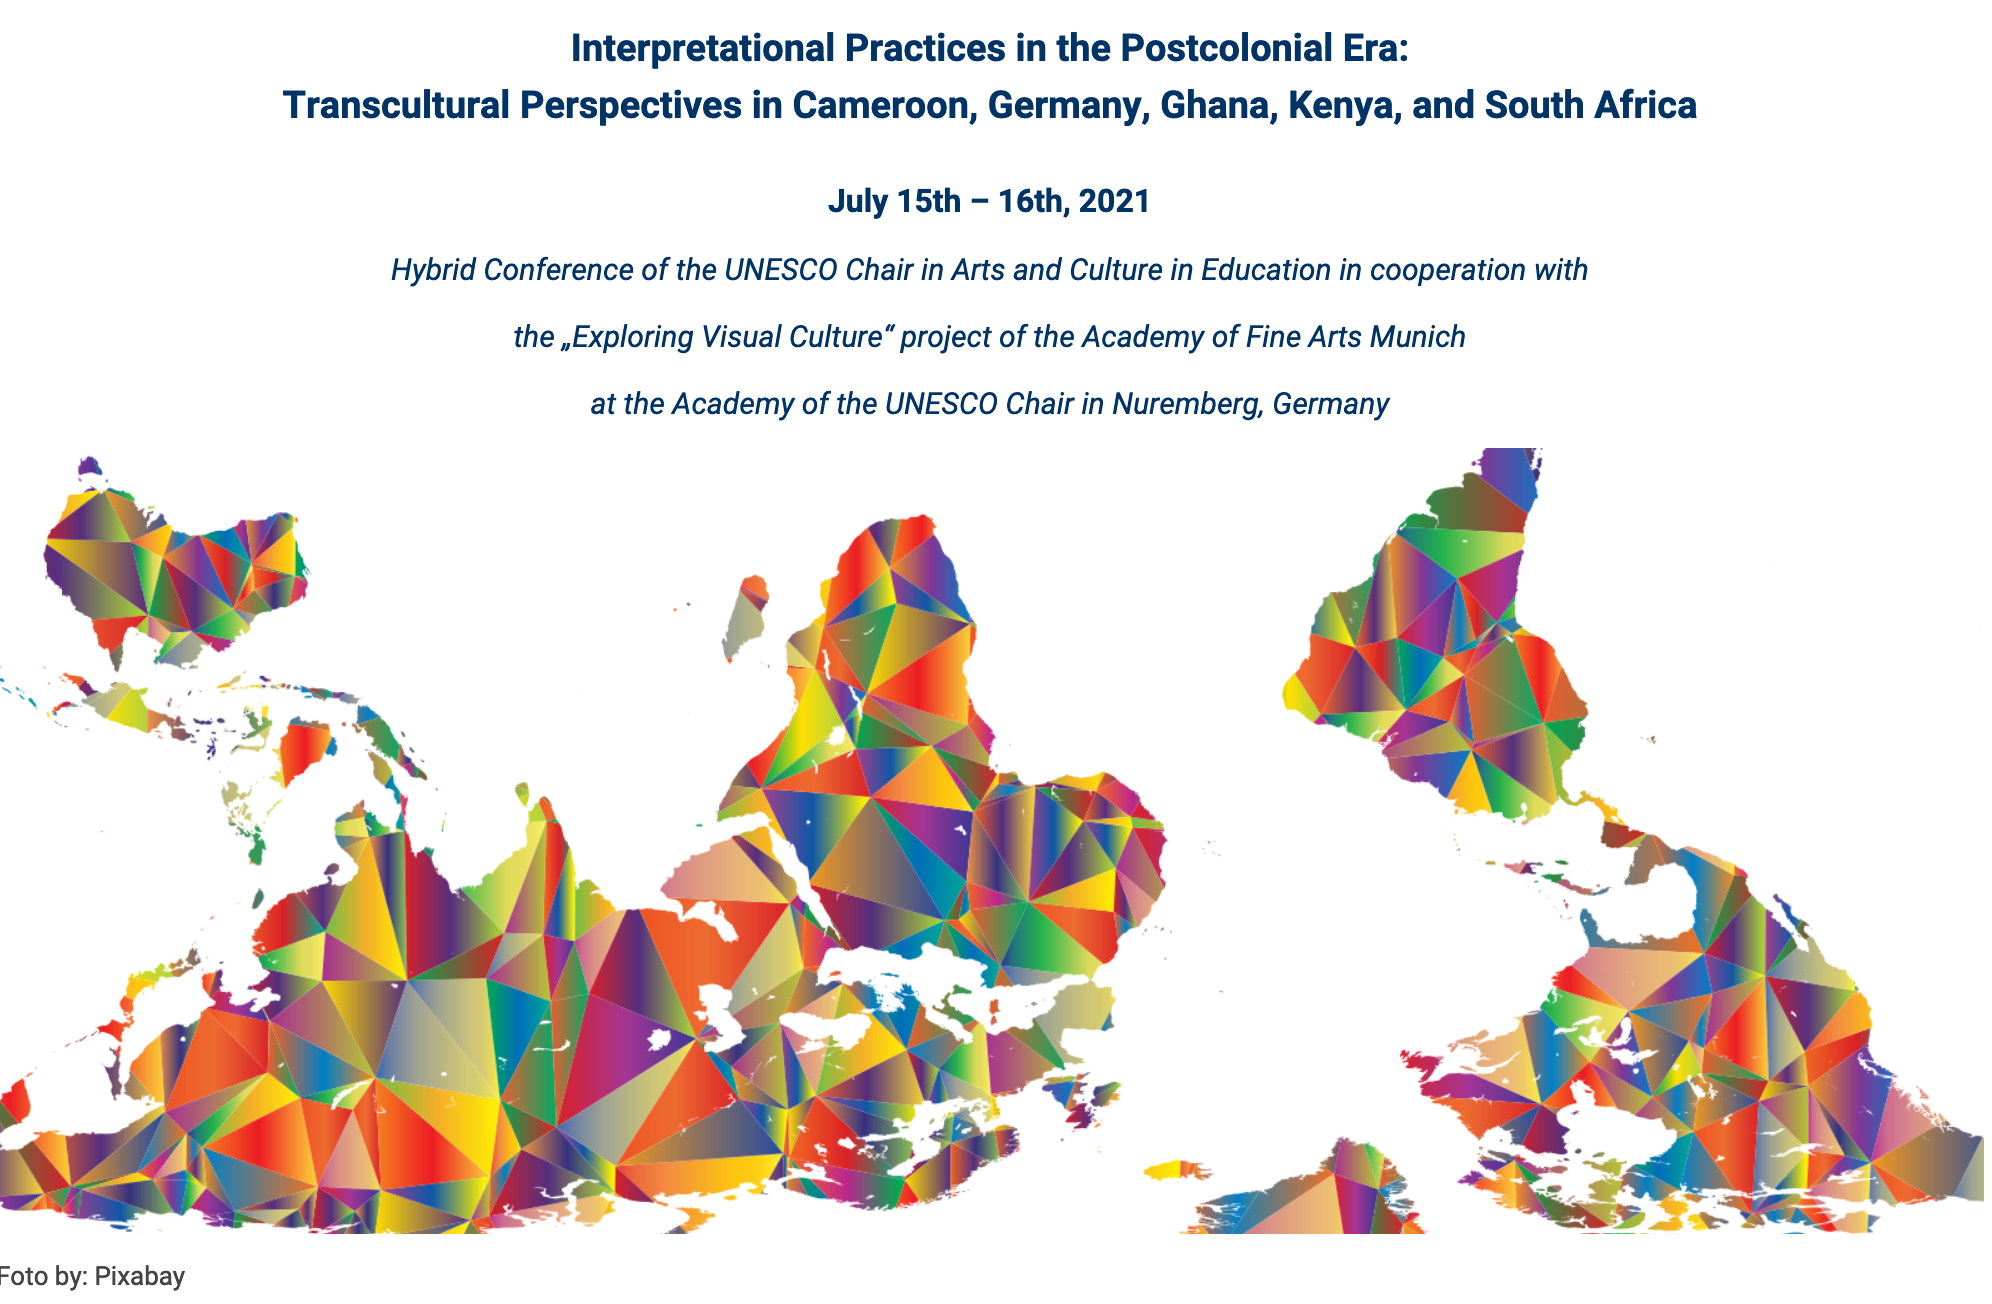 Our latest Conference: Interpretational Practices in the Postcolonial Era: Transcultural Perspectives in Cameroon, Germany, Ghana, Kenya, and South Africa